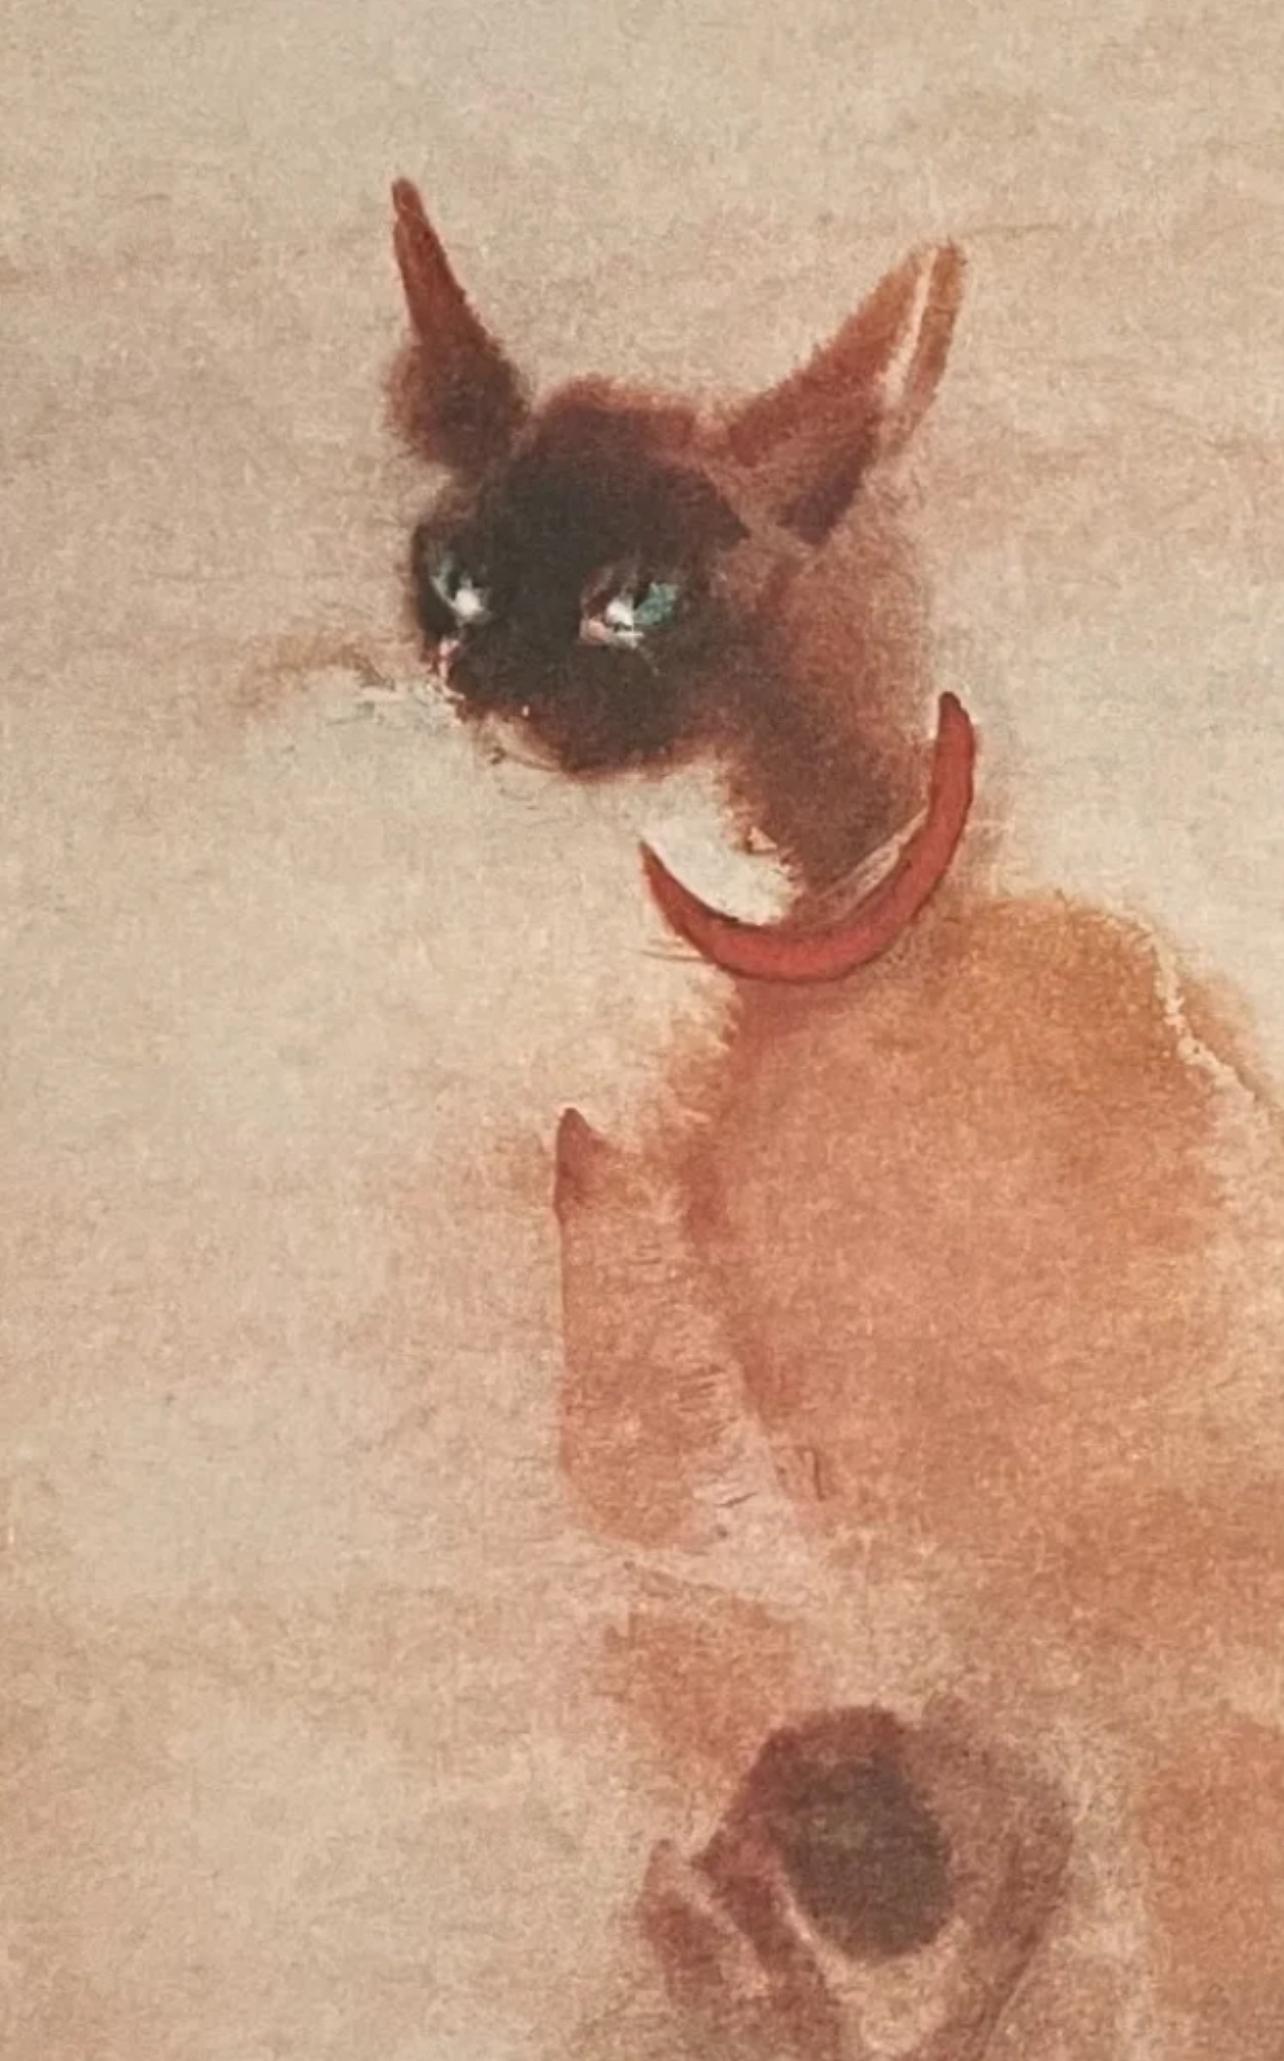 Moti, Siamese Cats (after) - Print by Kaiko Moti